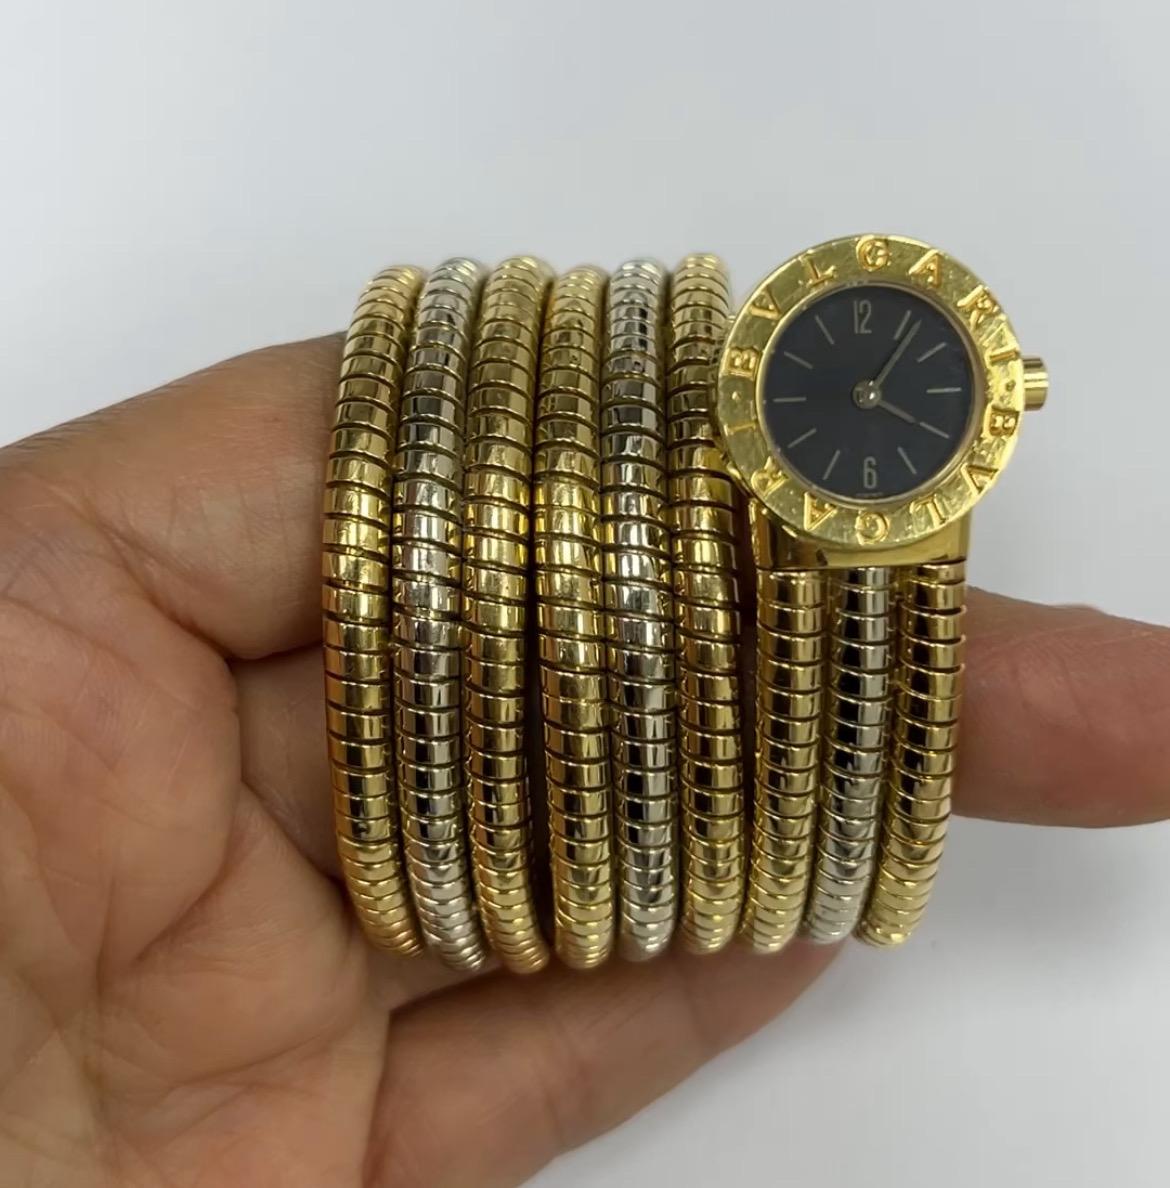 1980' Bulgari 18K yellow gold and white gold Serpenti Tubogas ladies watch with Black Dial
Marked :  BVLGARI 750 BB 19 1T P.7885 FABRIQUE EN SUISSE gold marks and Hallmarks
Weight : 142.2 g
Case : 19 x 19 mm
Movement : Quartz
